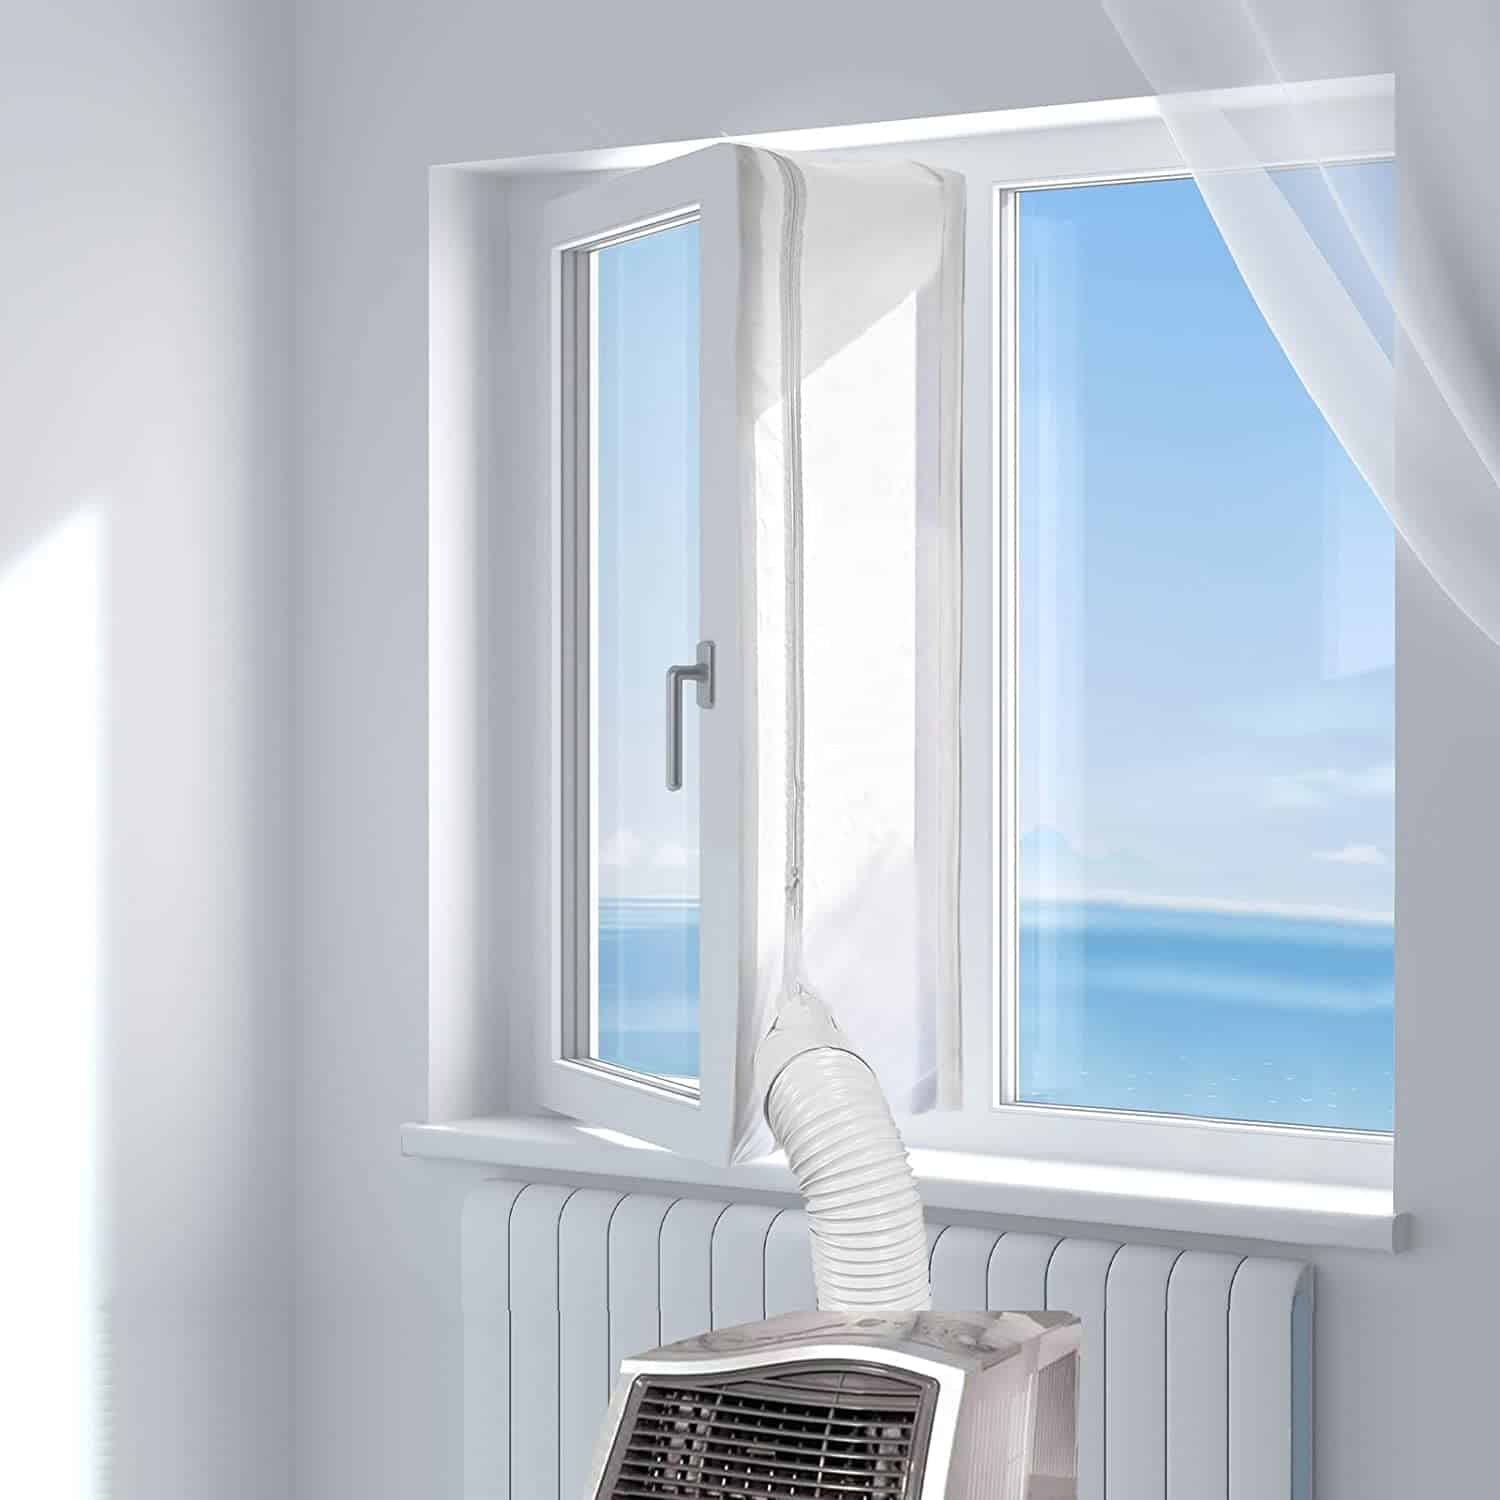 portable air conditioner in a casement window